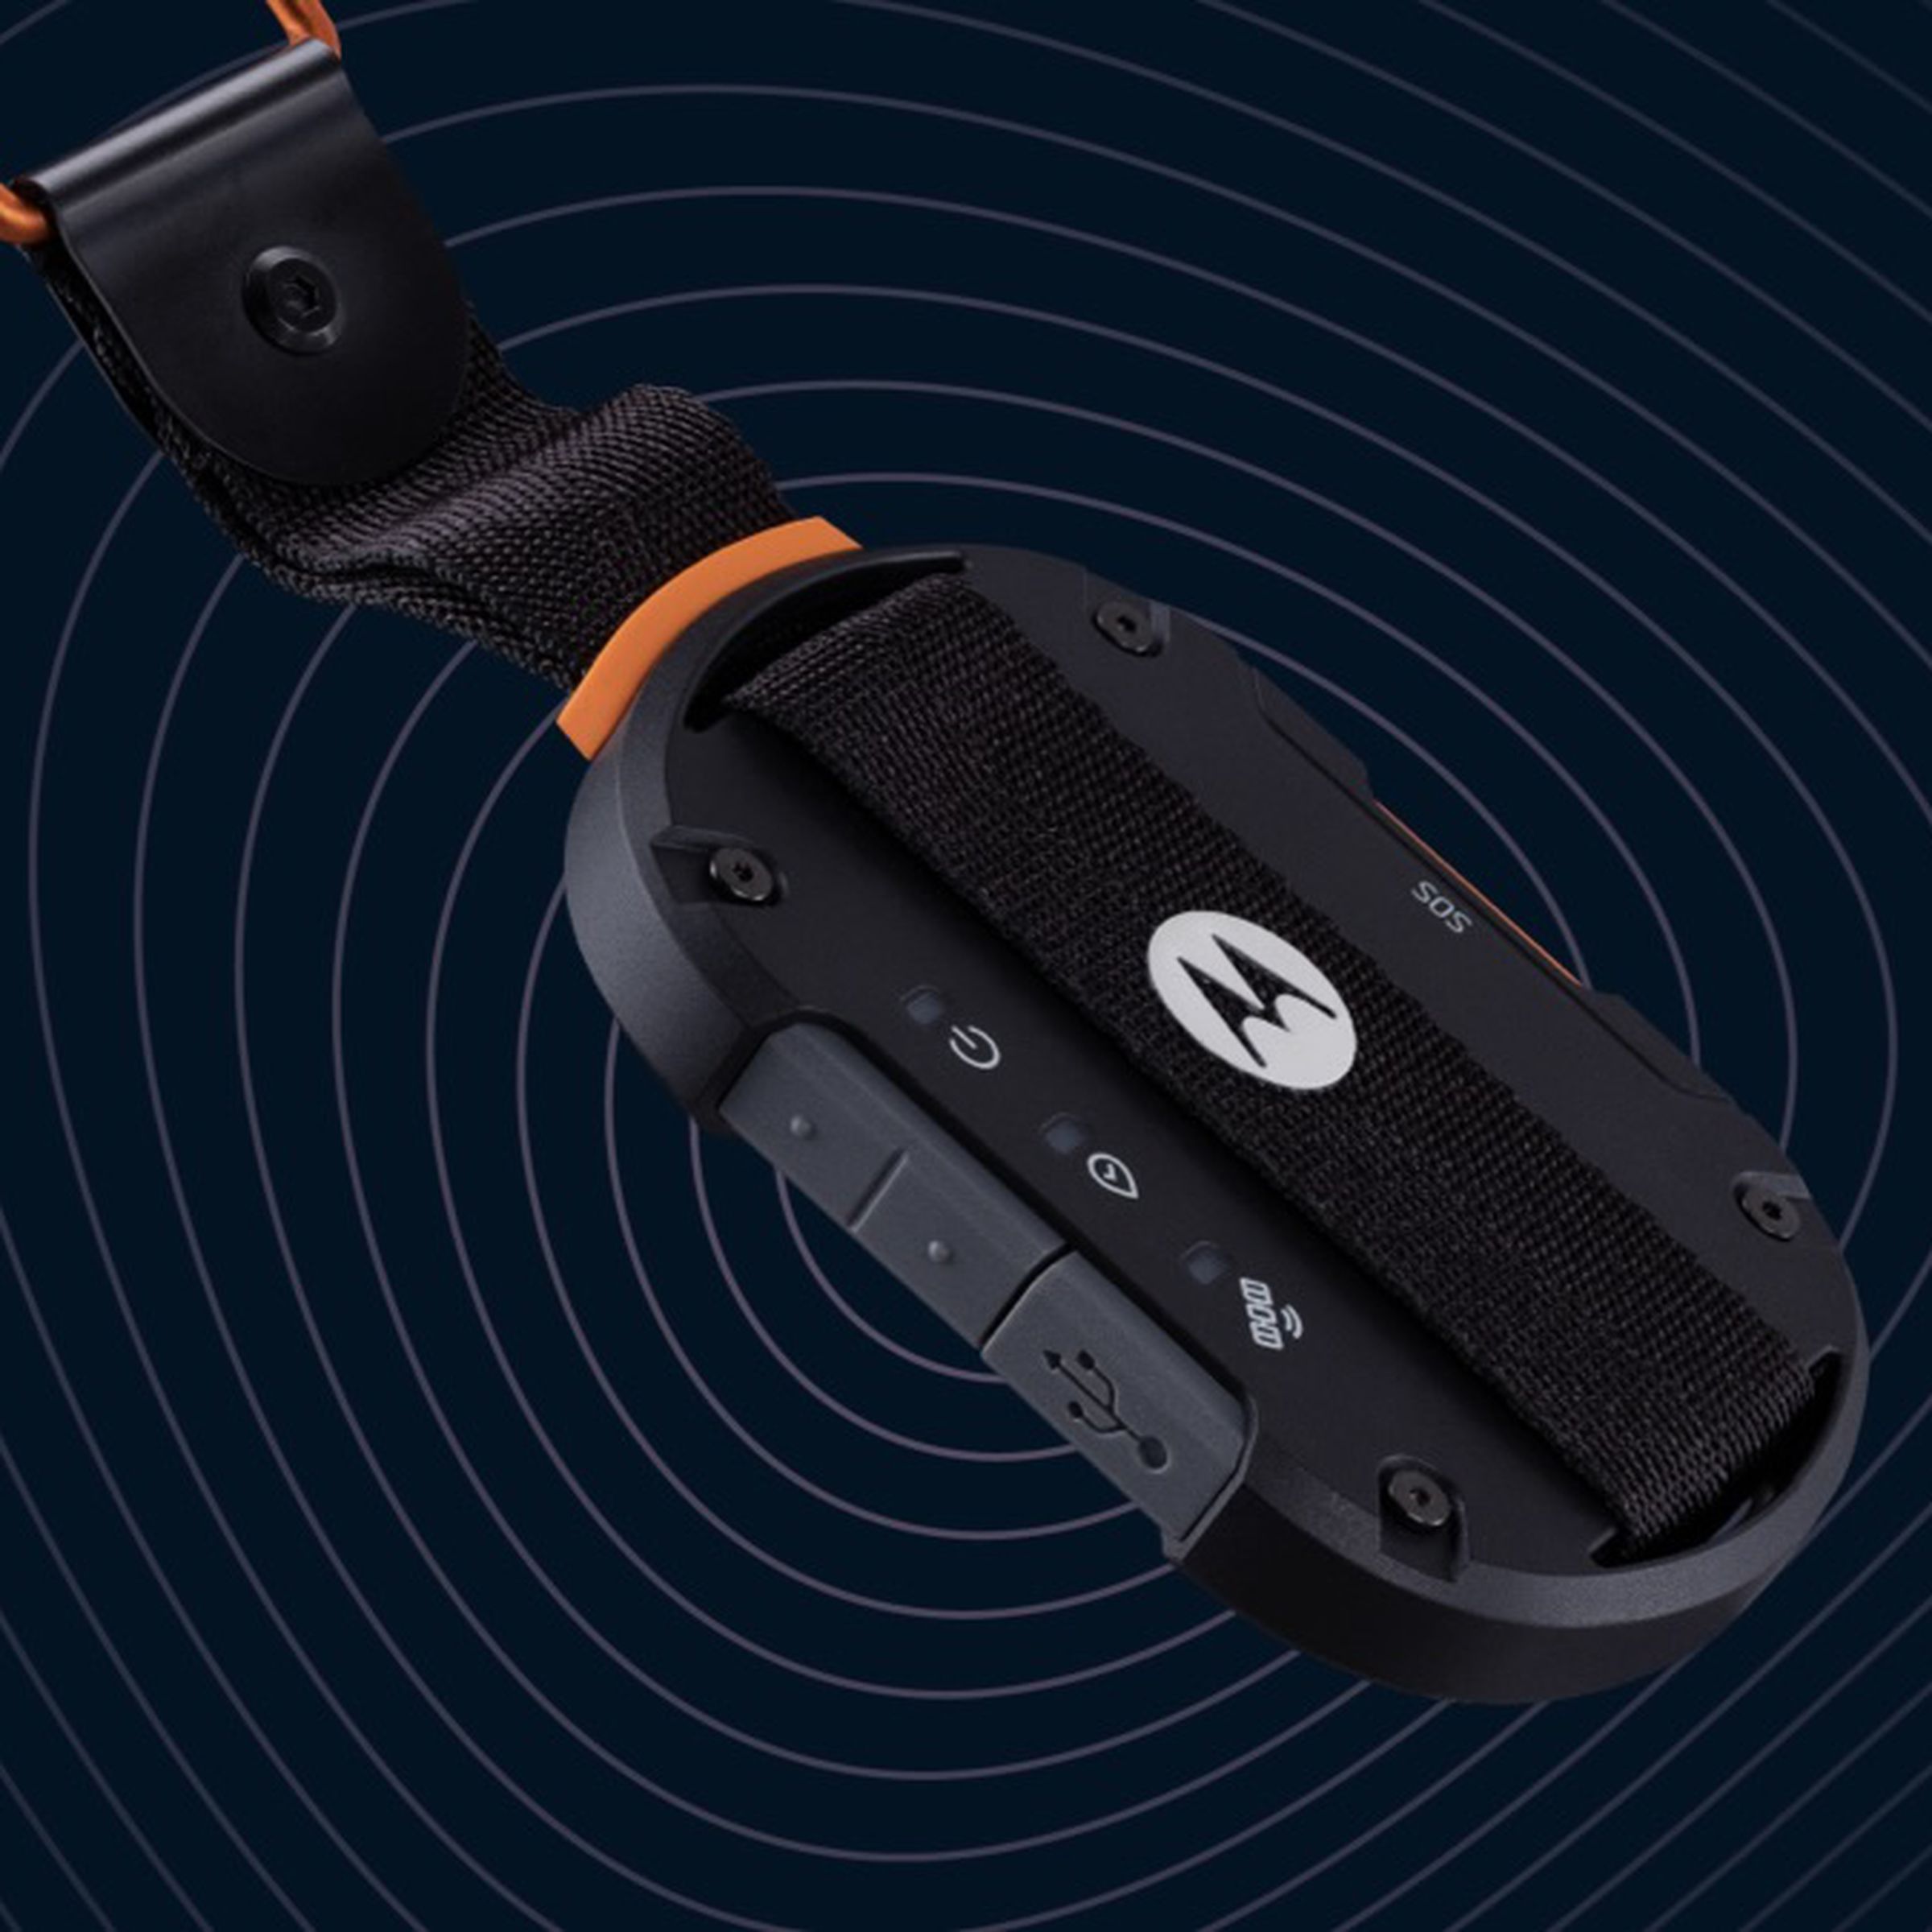 The defy satellite link looks like a car key fob on a keychain with an orange key loop. It’s got a M logo in the middle, waterproof covered USB port, and buttons on the side.